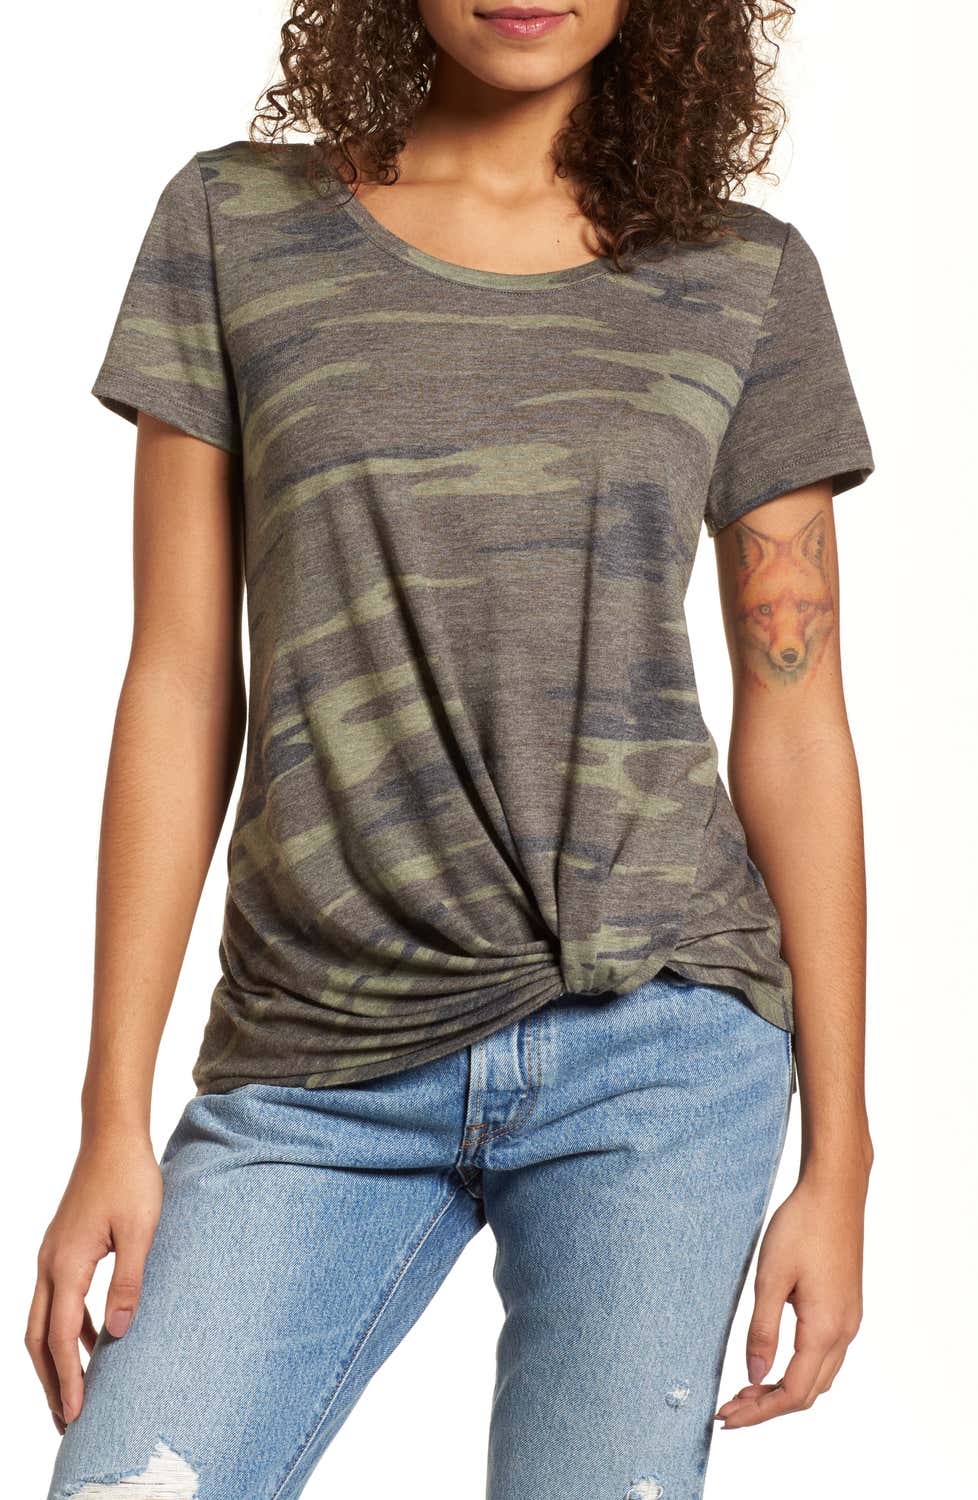 top outfits 2017 from pinterestingplans - camo tee 